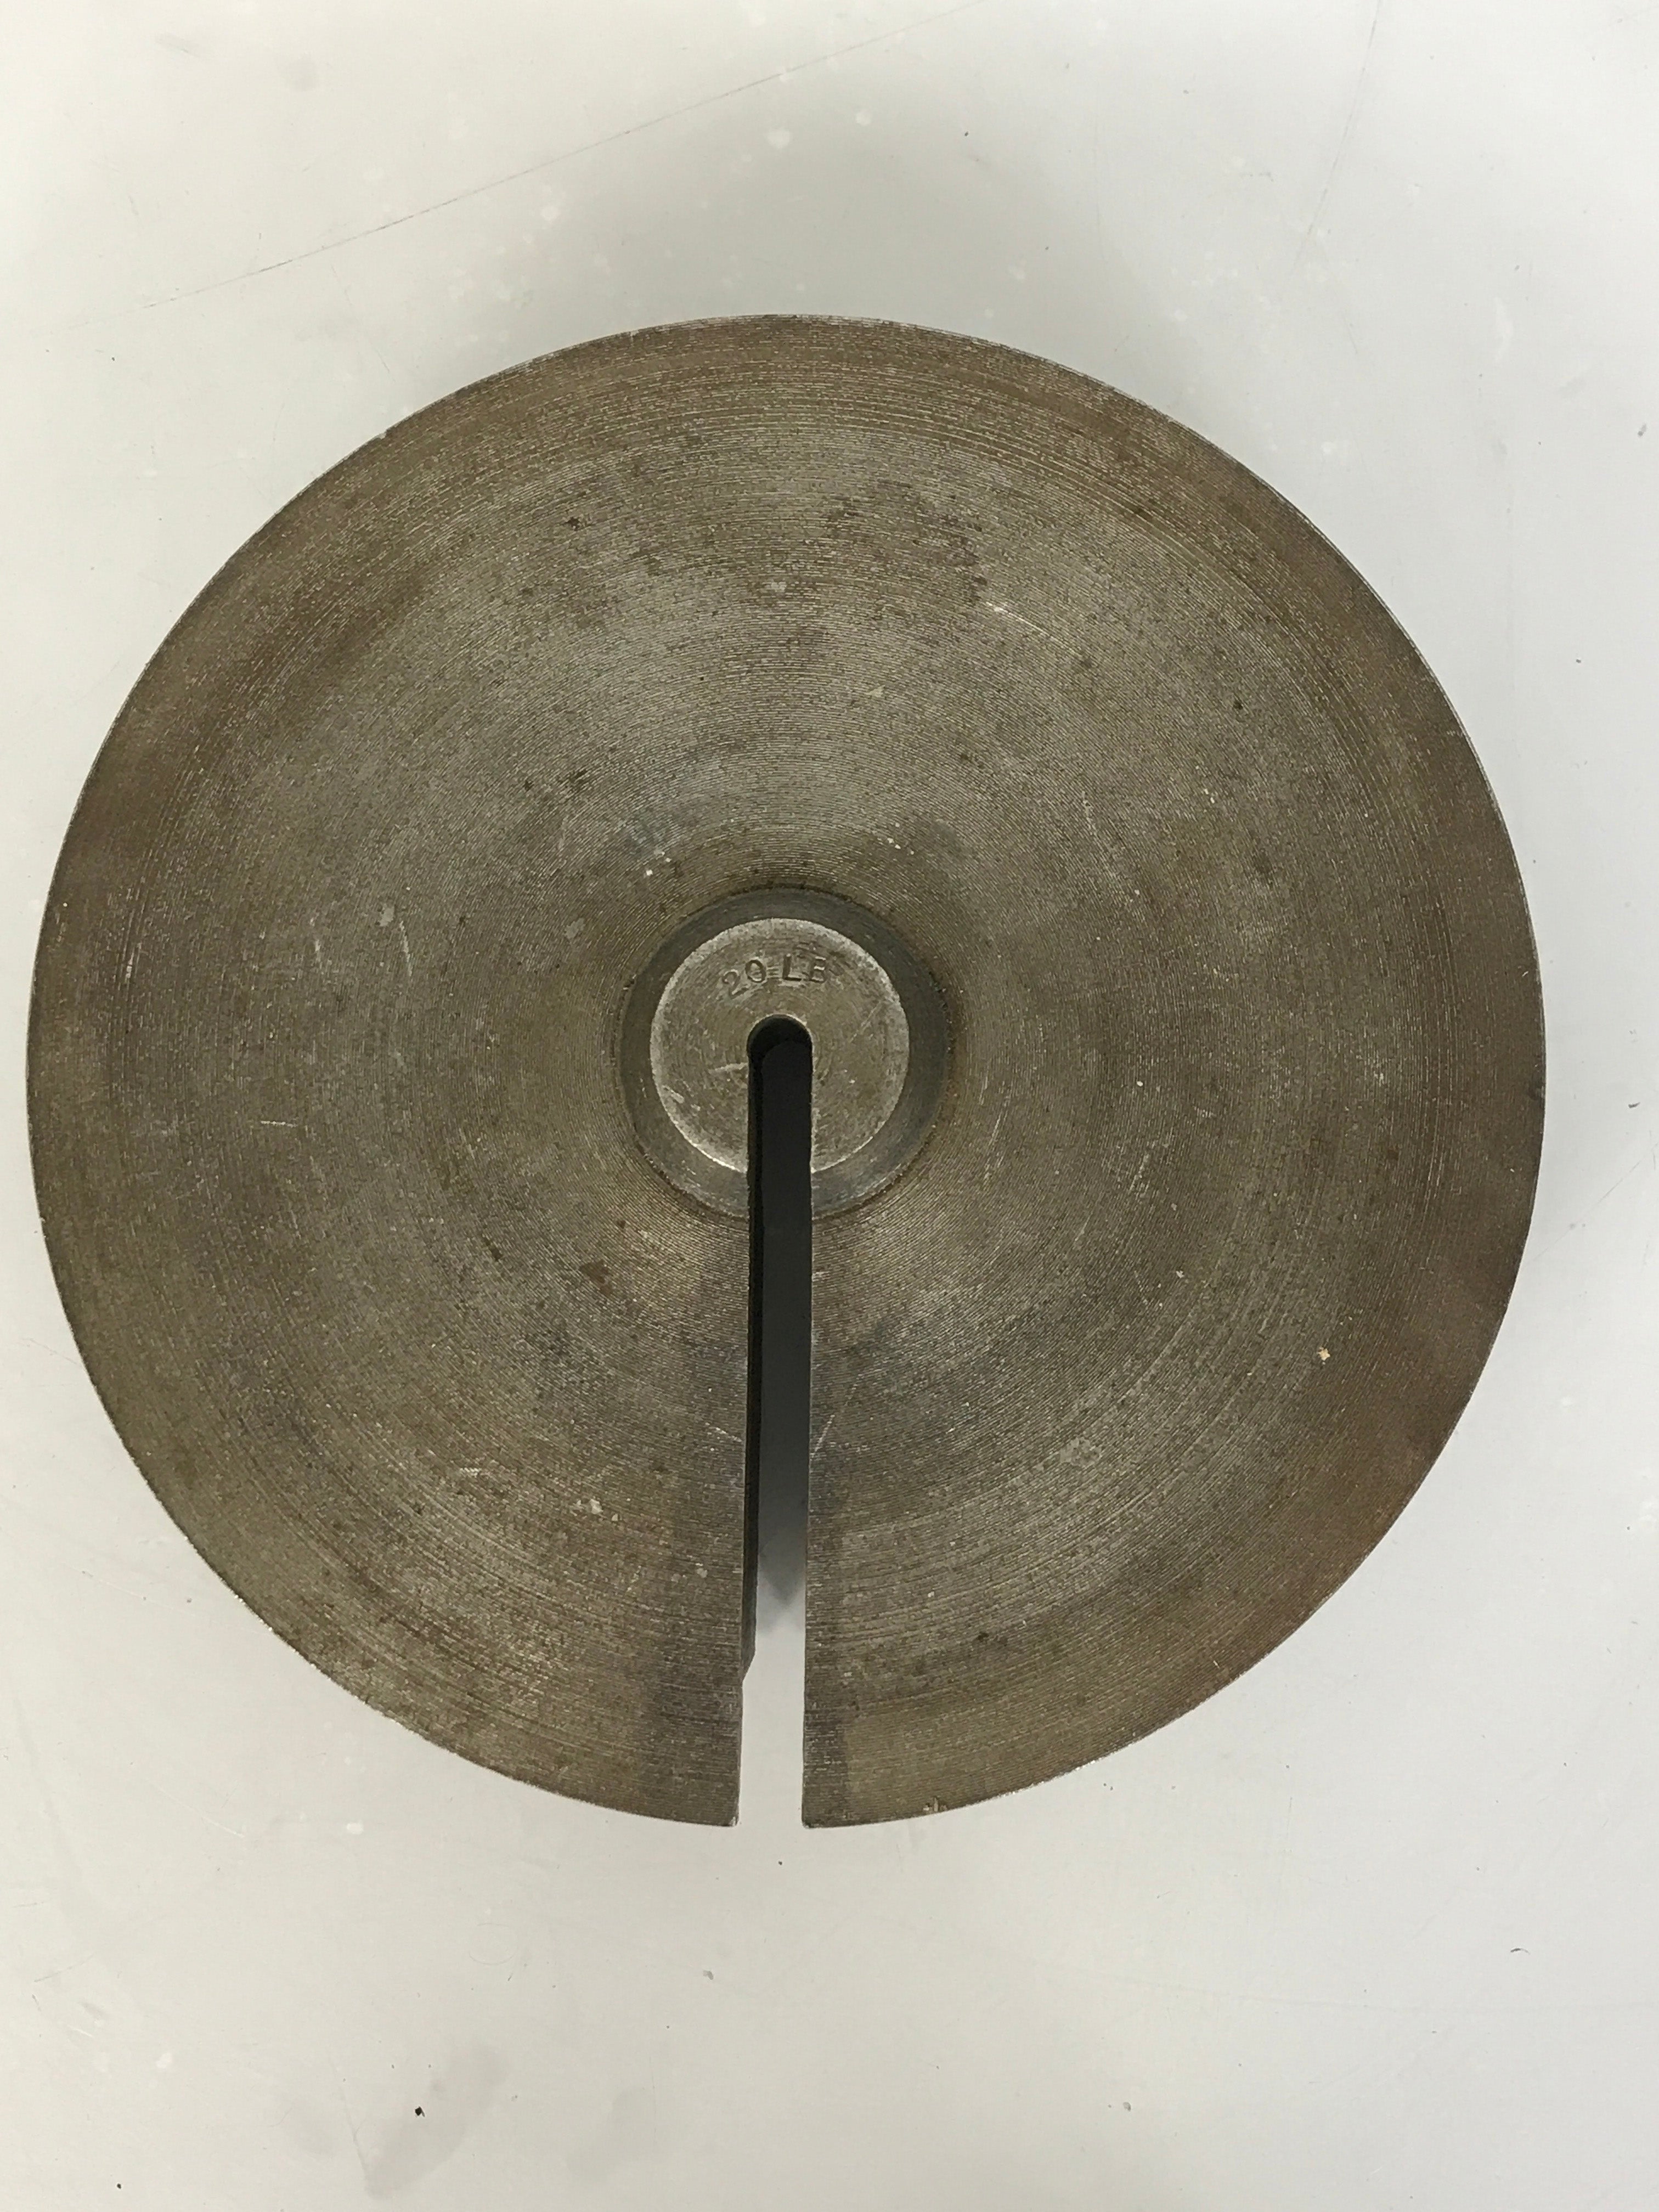 20 LB Round Cast Iron Slotted Weight for Hanging Balance Scale #4